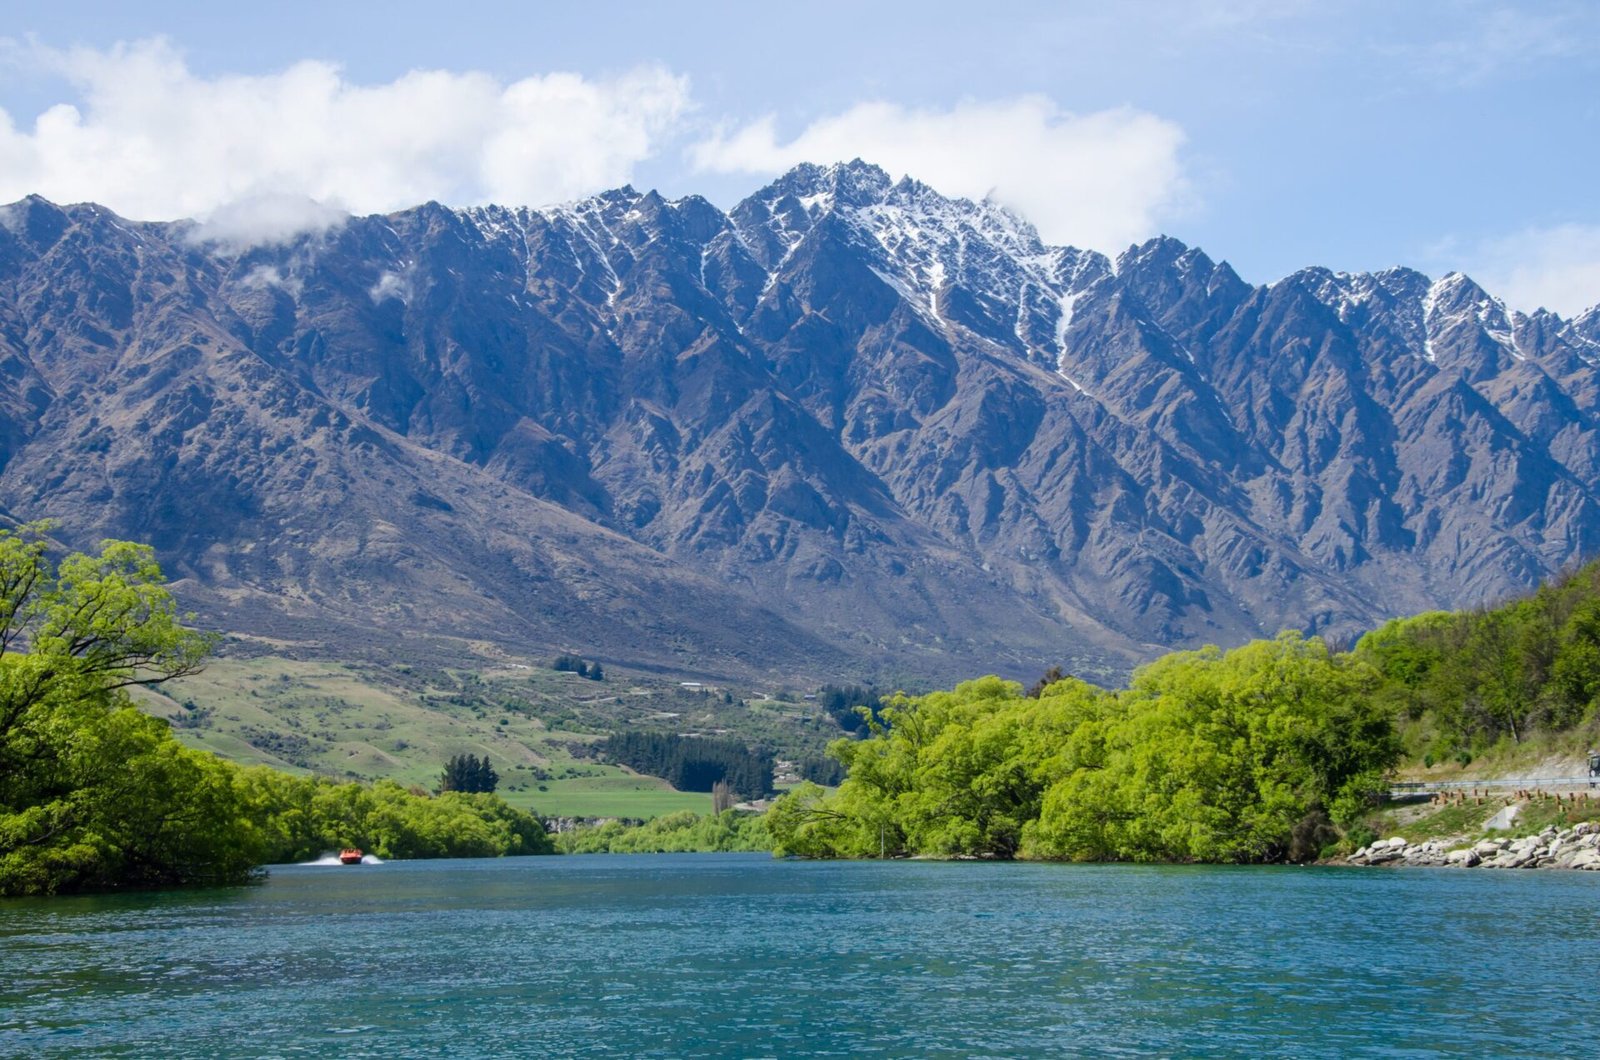 A beautiful view of The Remarkables mountain range in  Queenstown, New Zealand